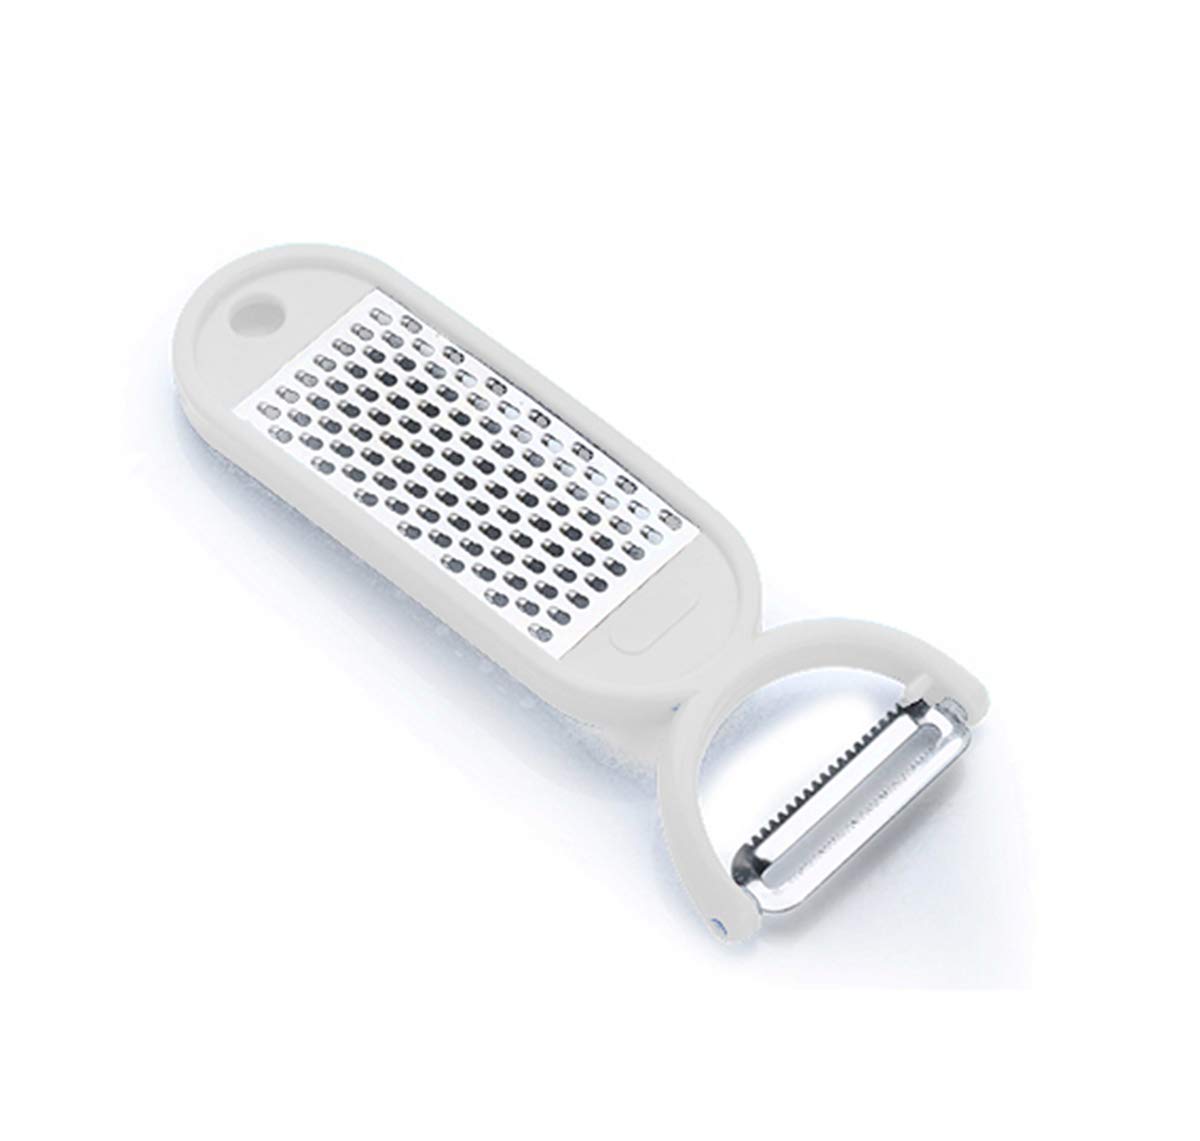 Stuard Cheese/Ginger/Garlic/Nutmeg & Chocolate Grater Pack of 1 Silver from www.stuard.in